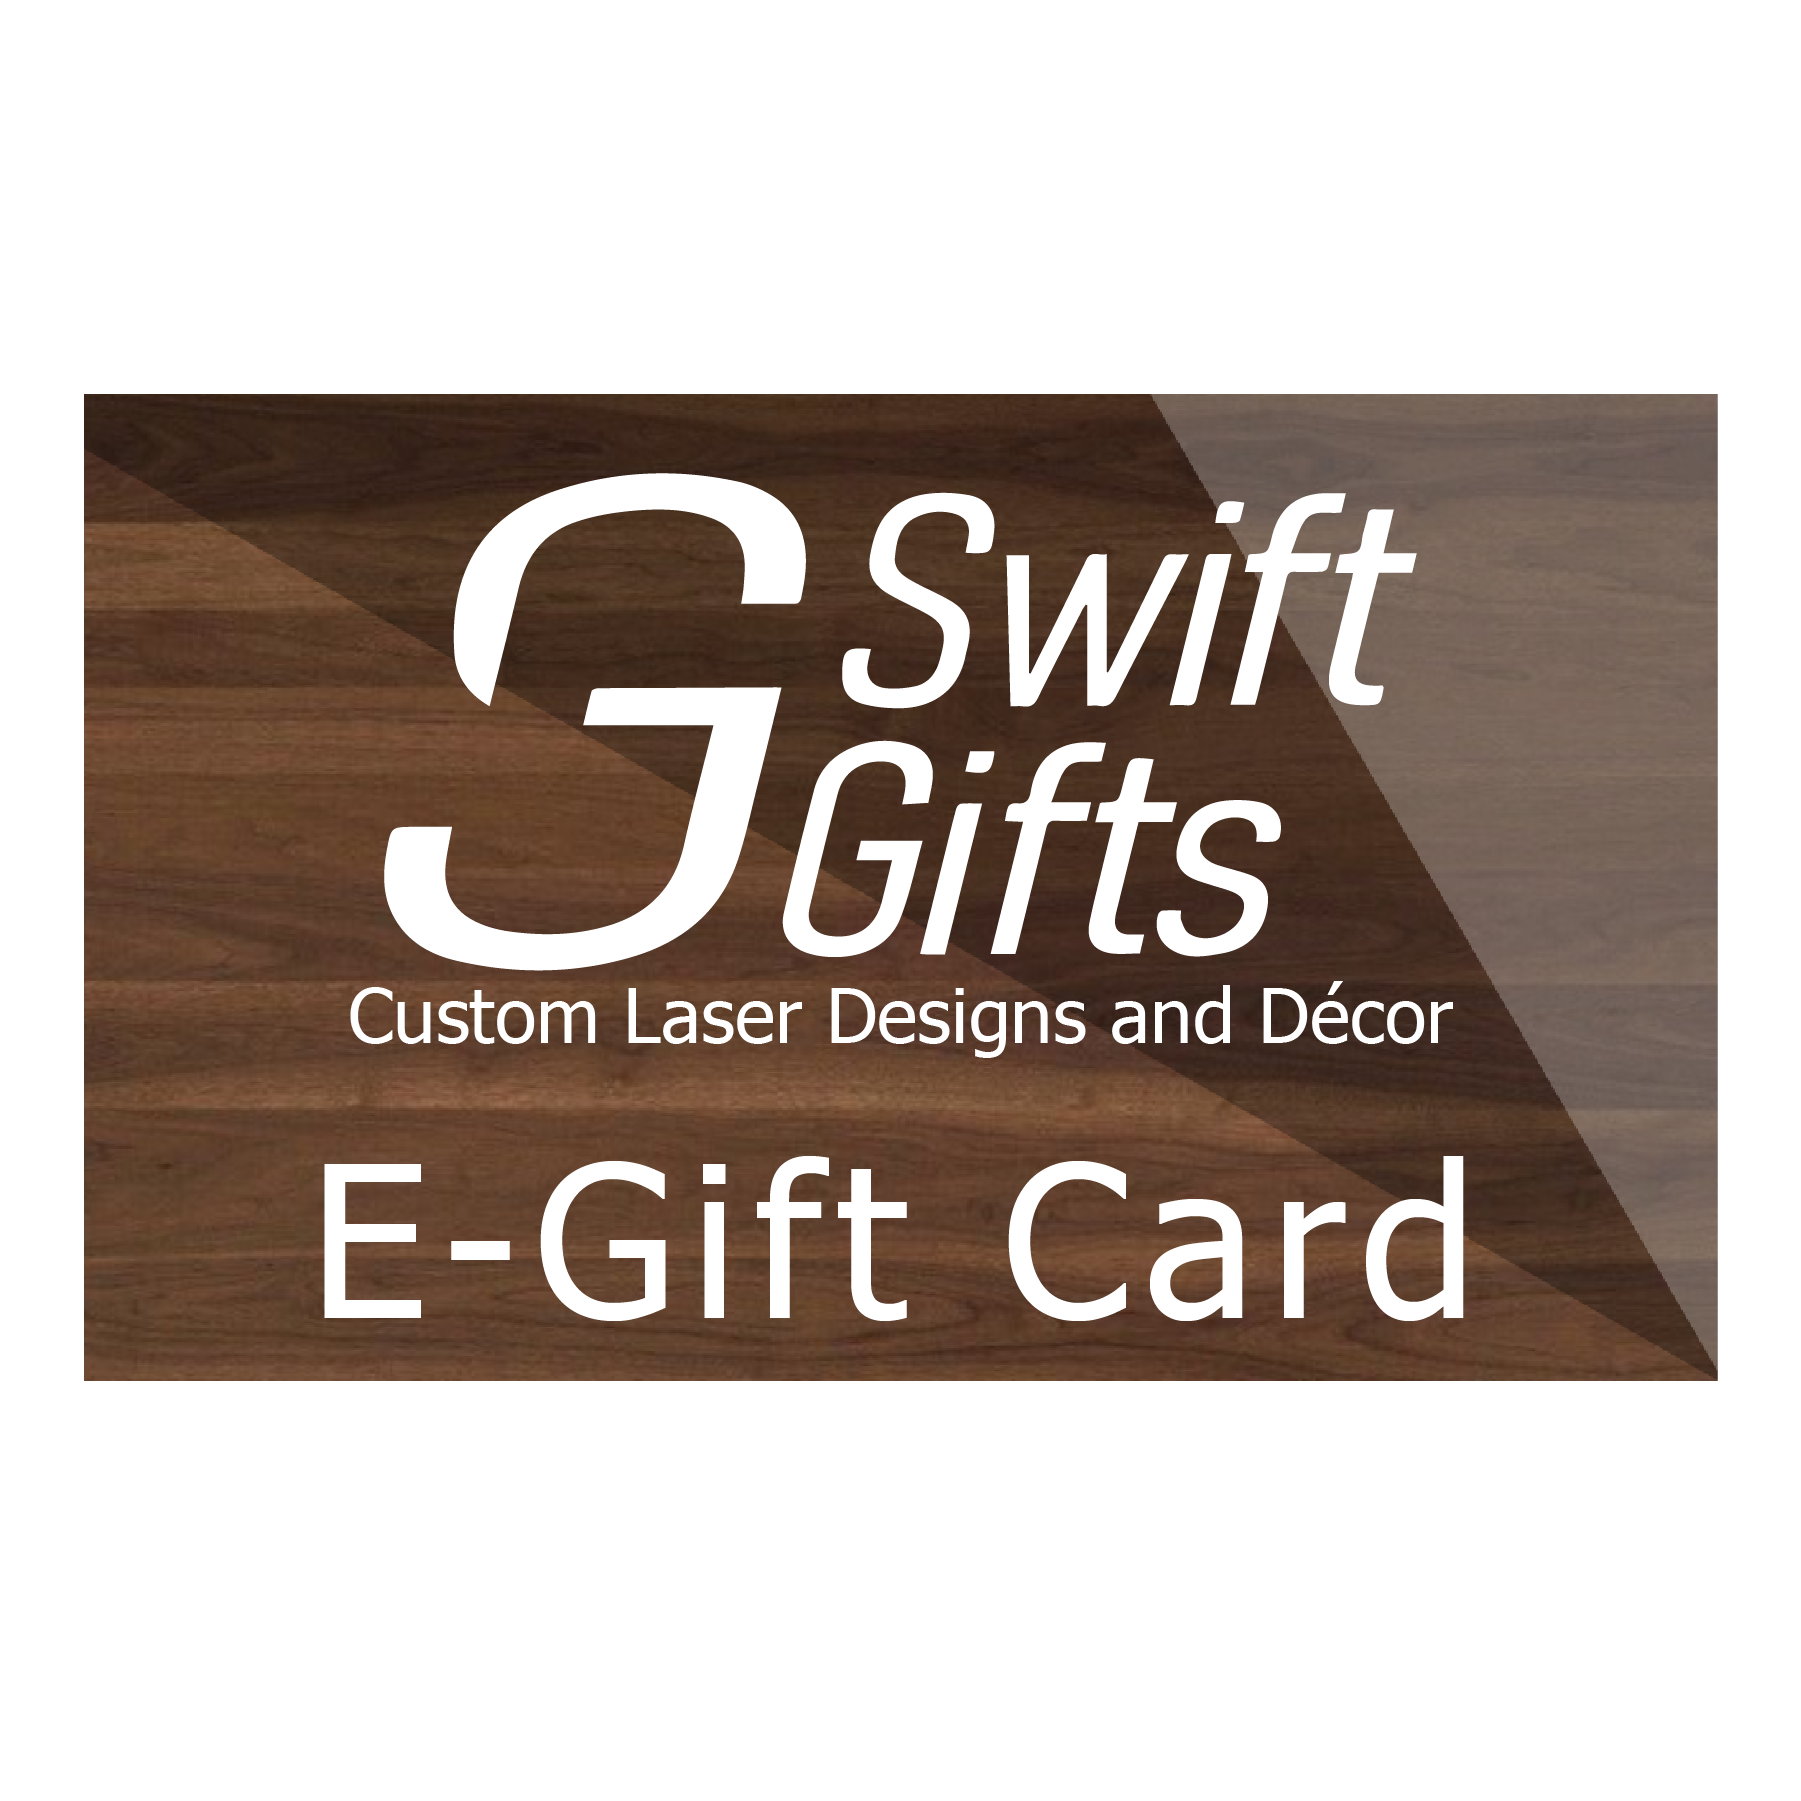 E-GIFT CARD  Egift card, Electronic gift cards, Gift card